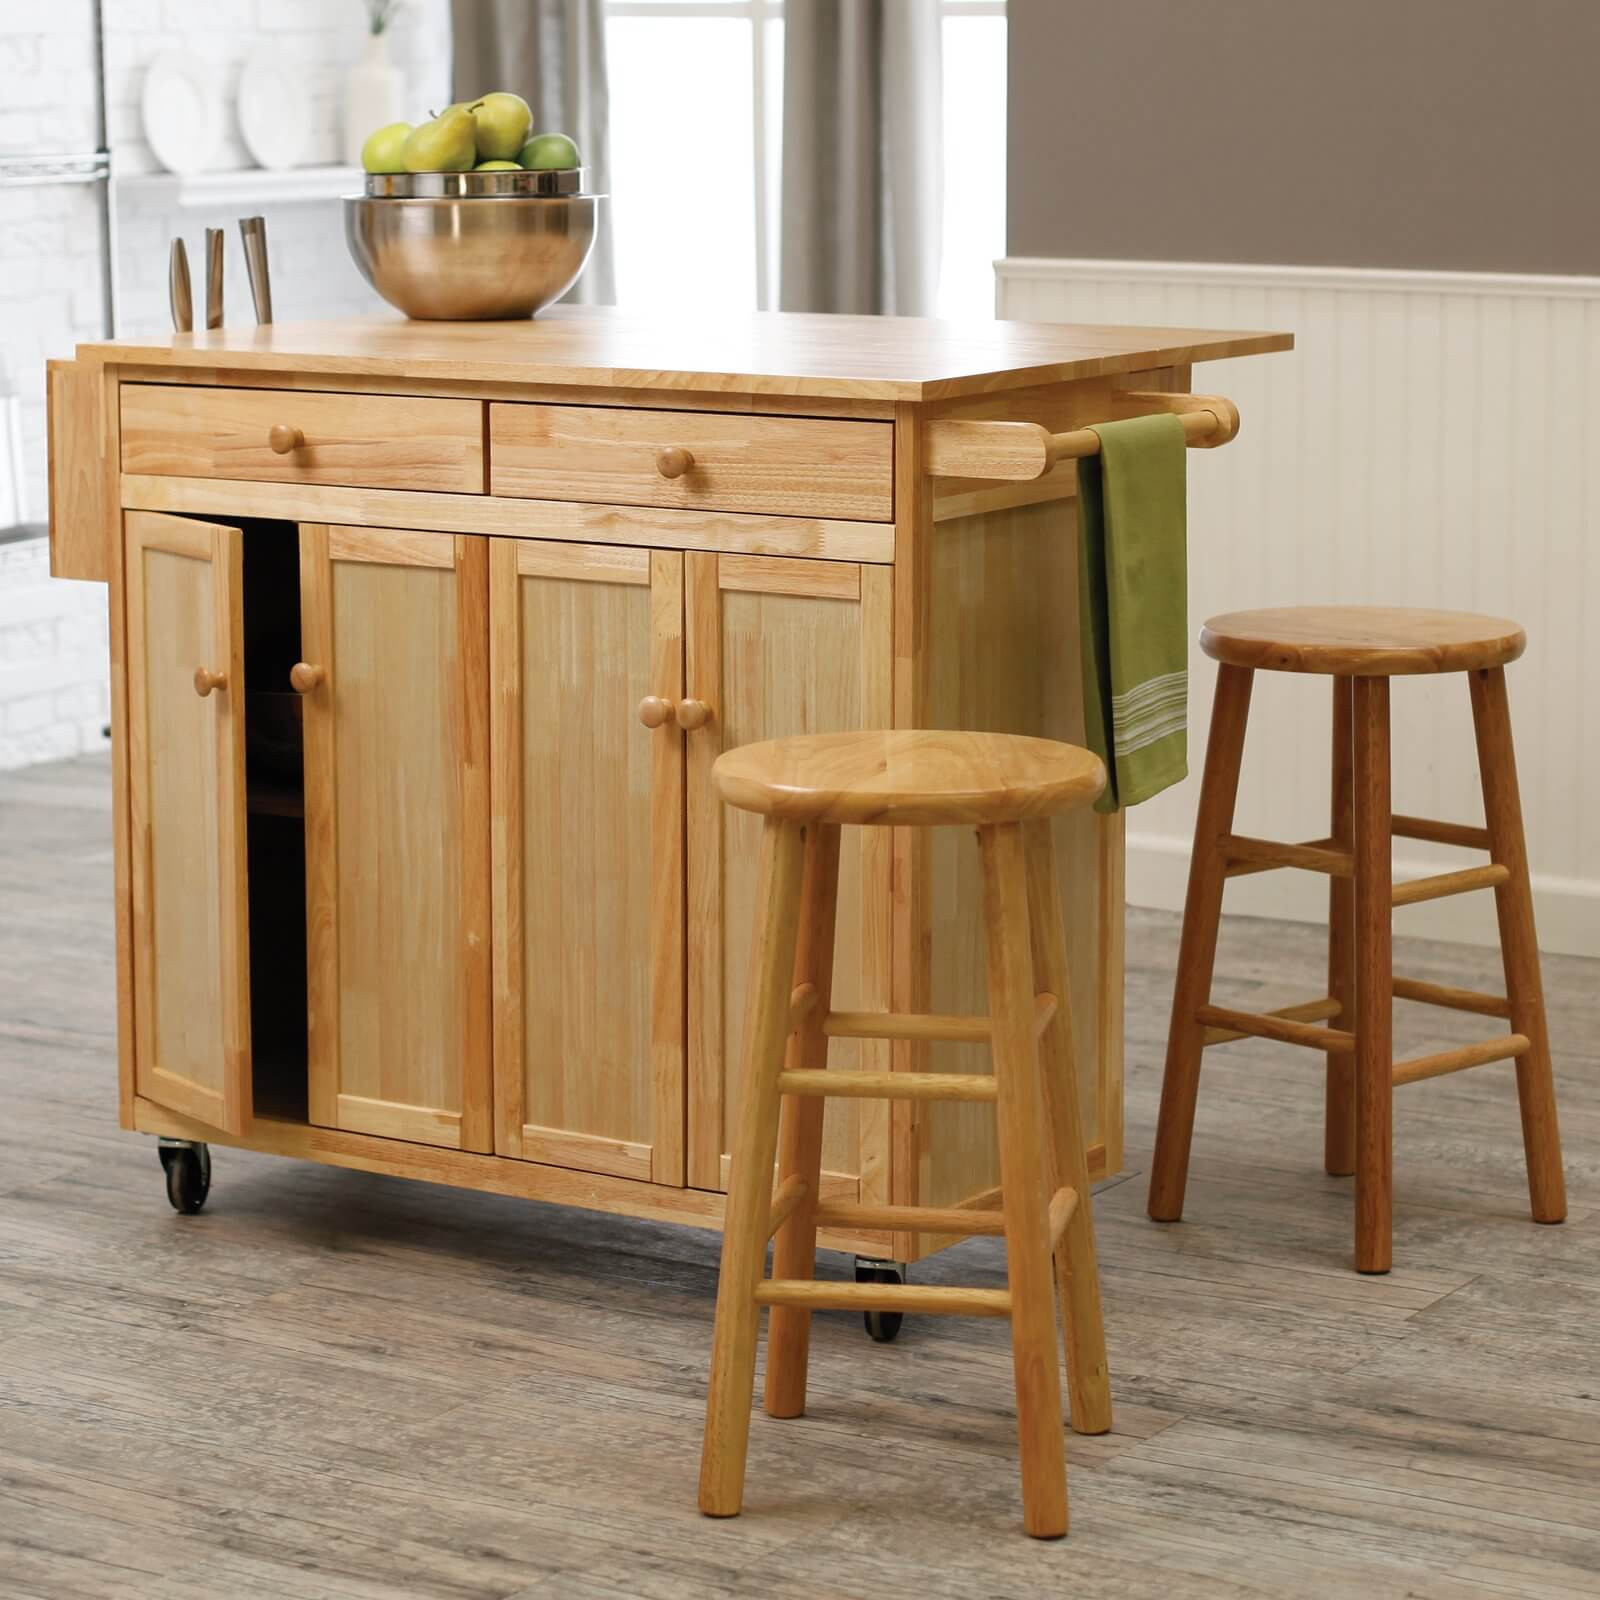 Small Kitchen Island On Wheels
 10 Types of Small Kitchen Islands on Wheels